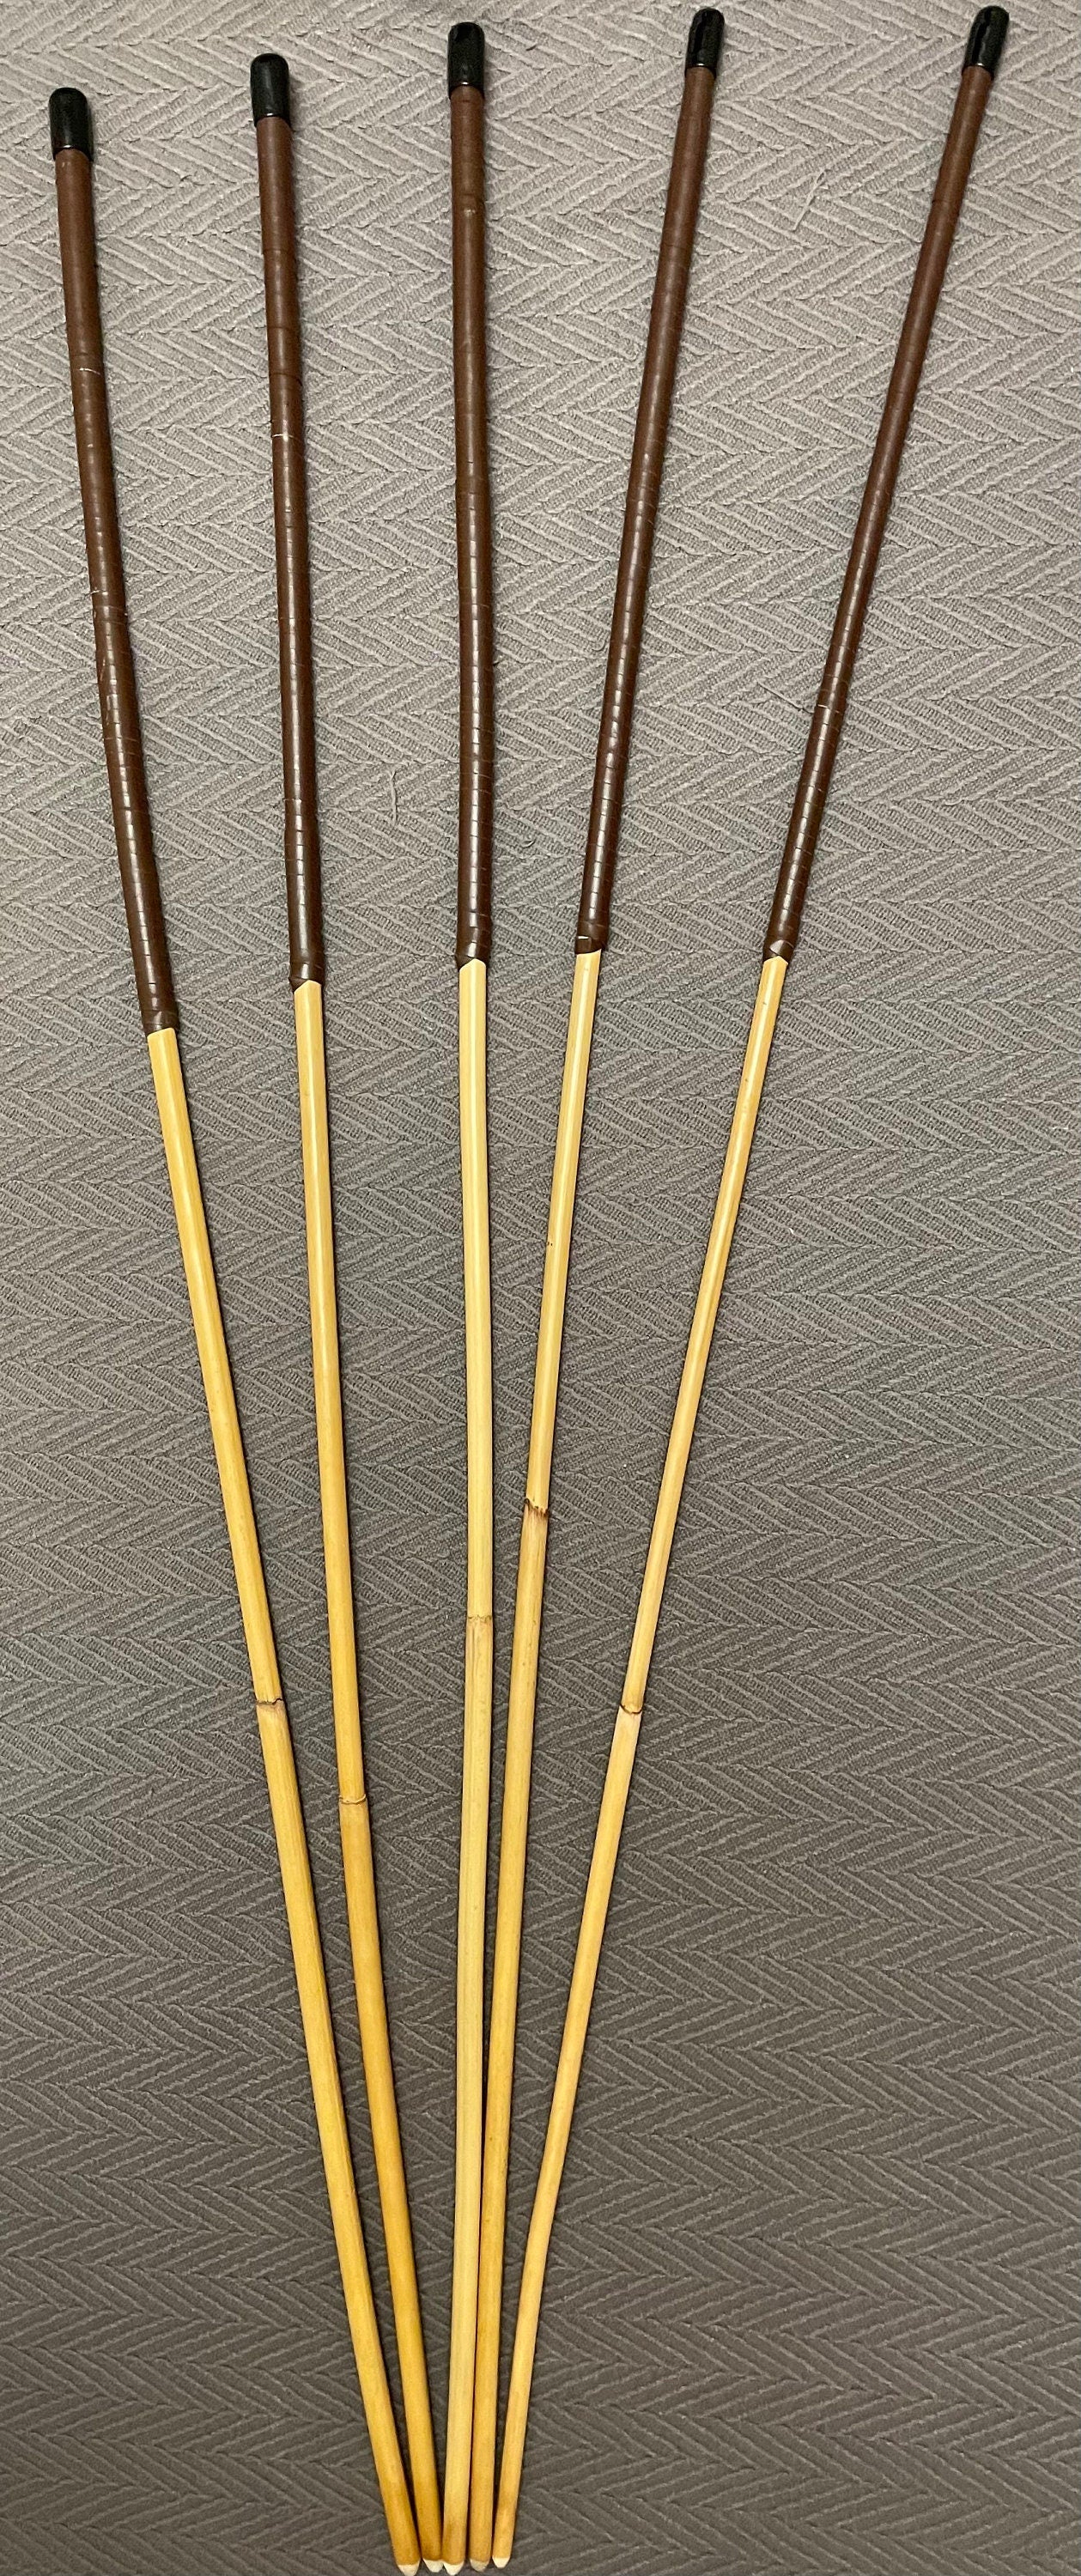 Set of 5 Long Whippy Dragon Canes with Brnady Kangaroo Leather Handles